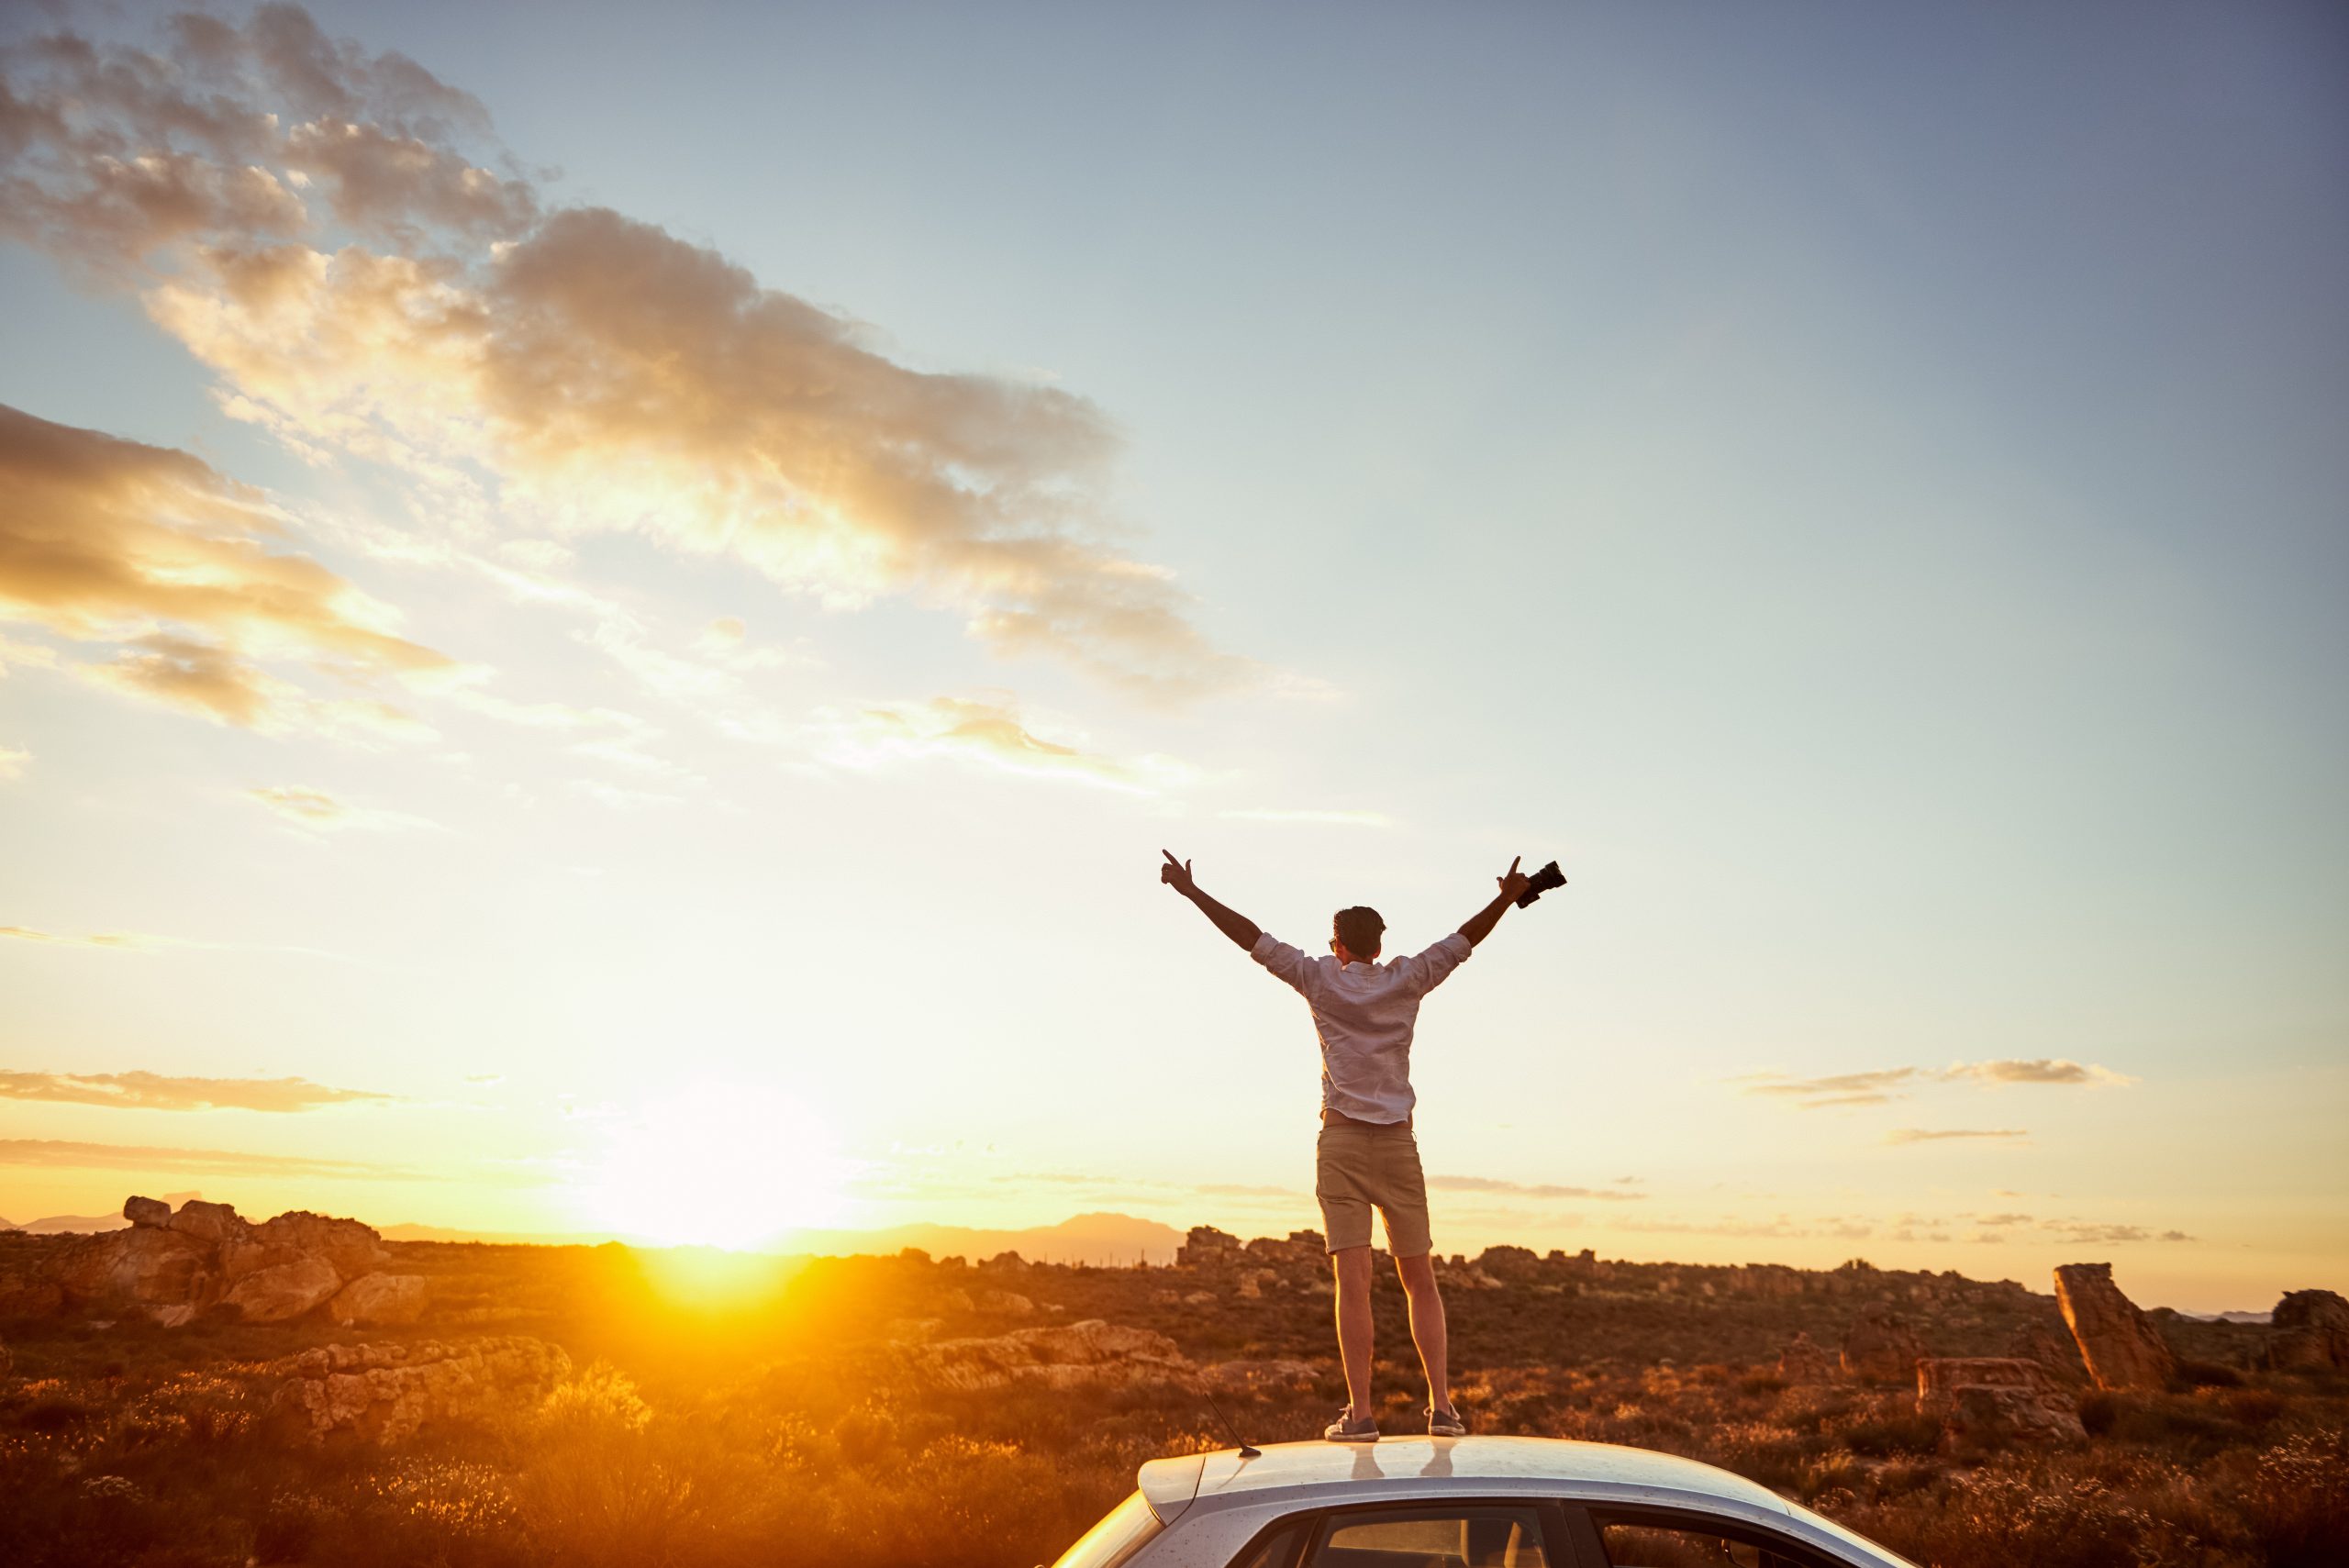 Rearview shot of a young man standing on top of a car with his arms outstretched in a rural landscape